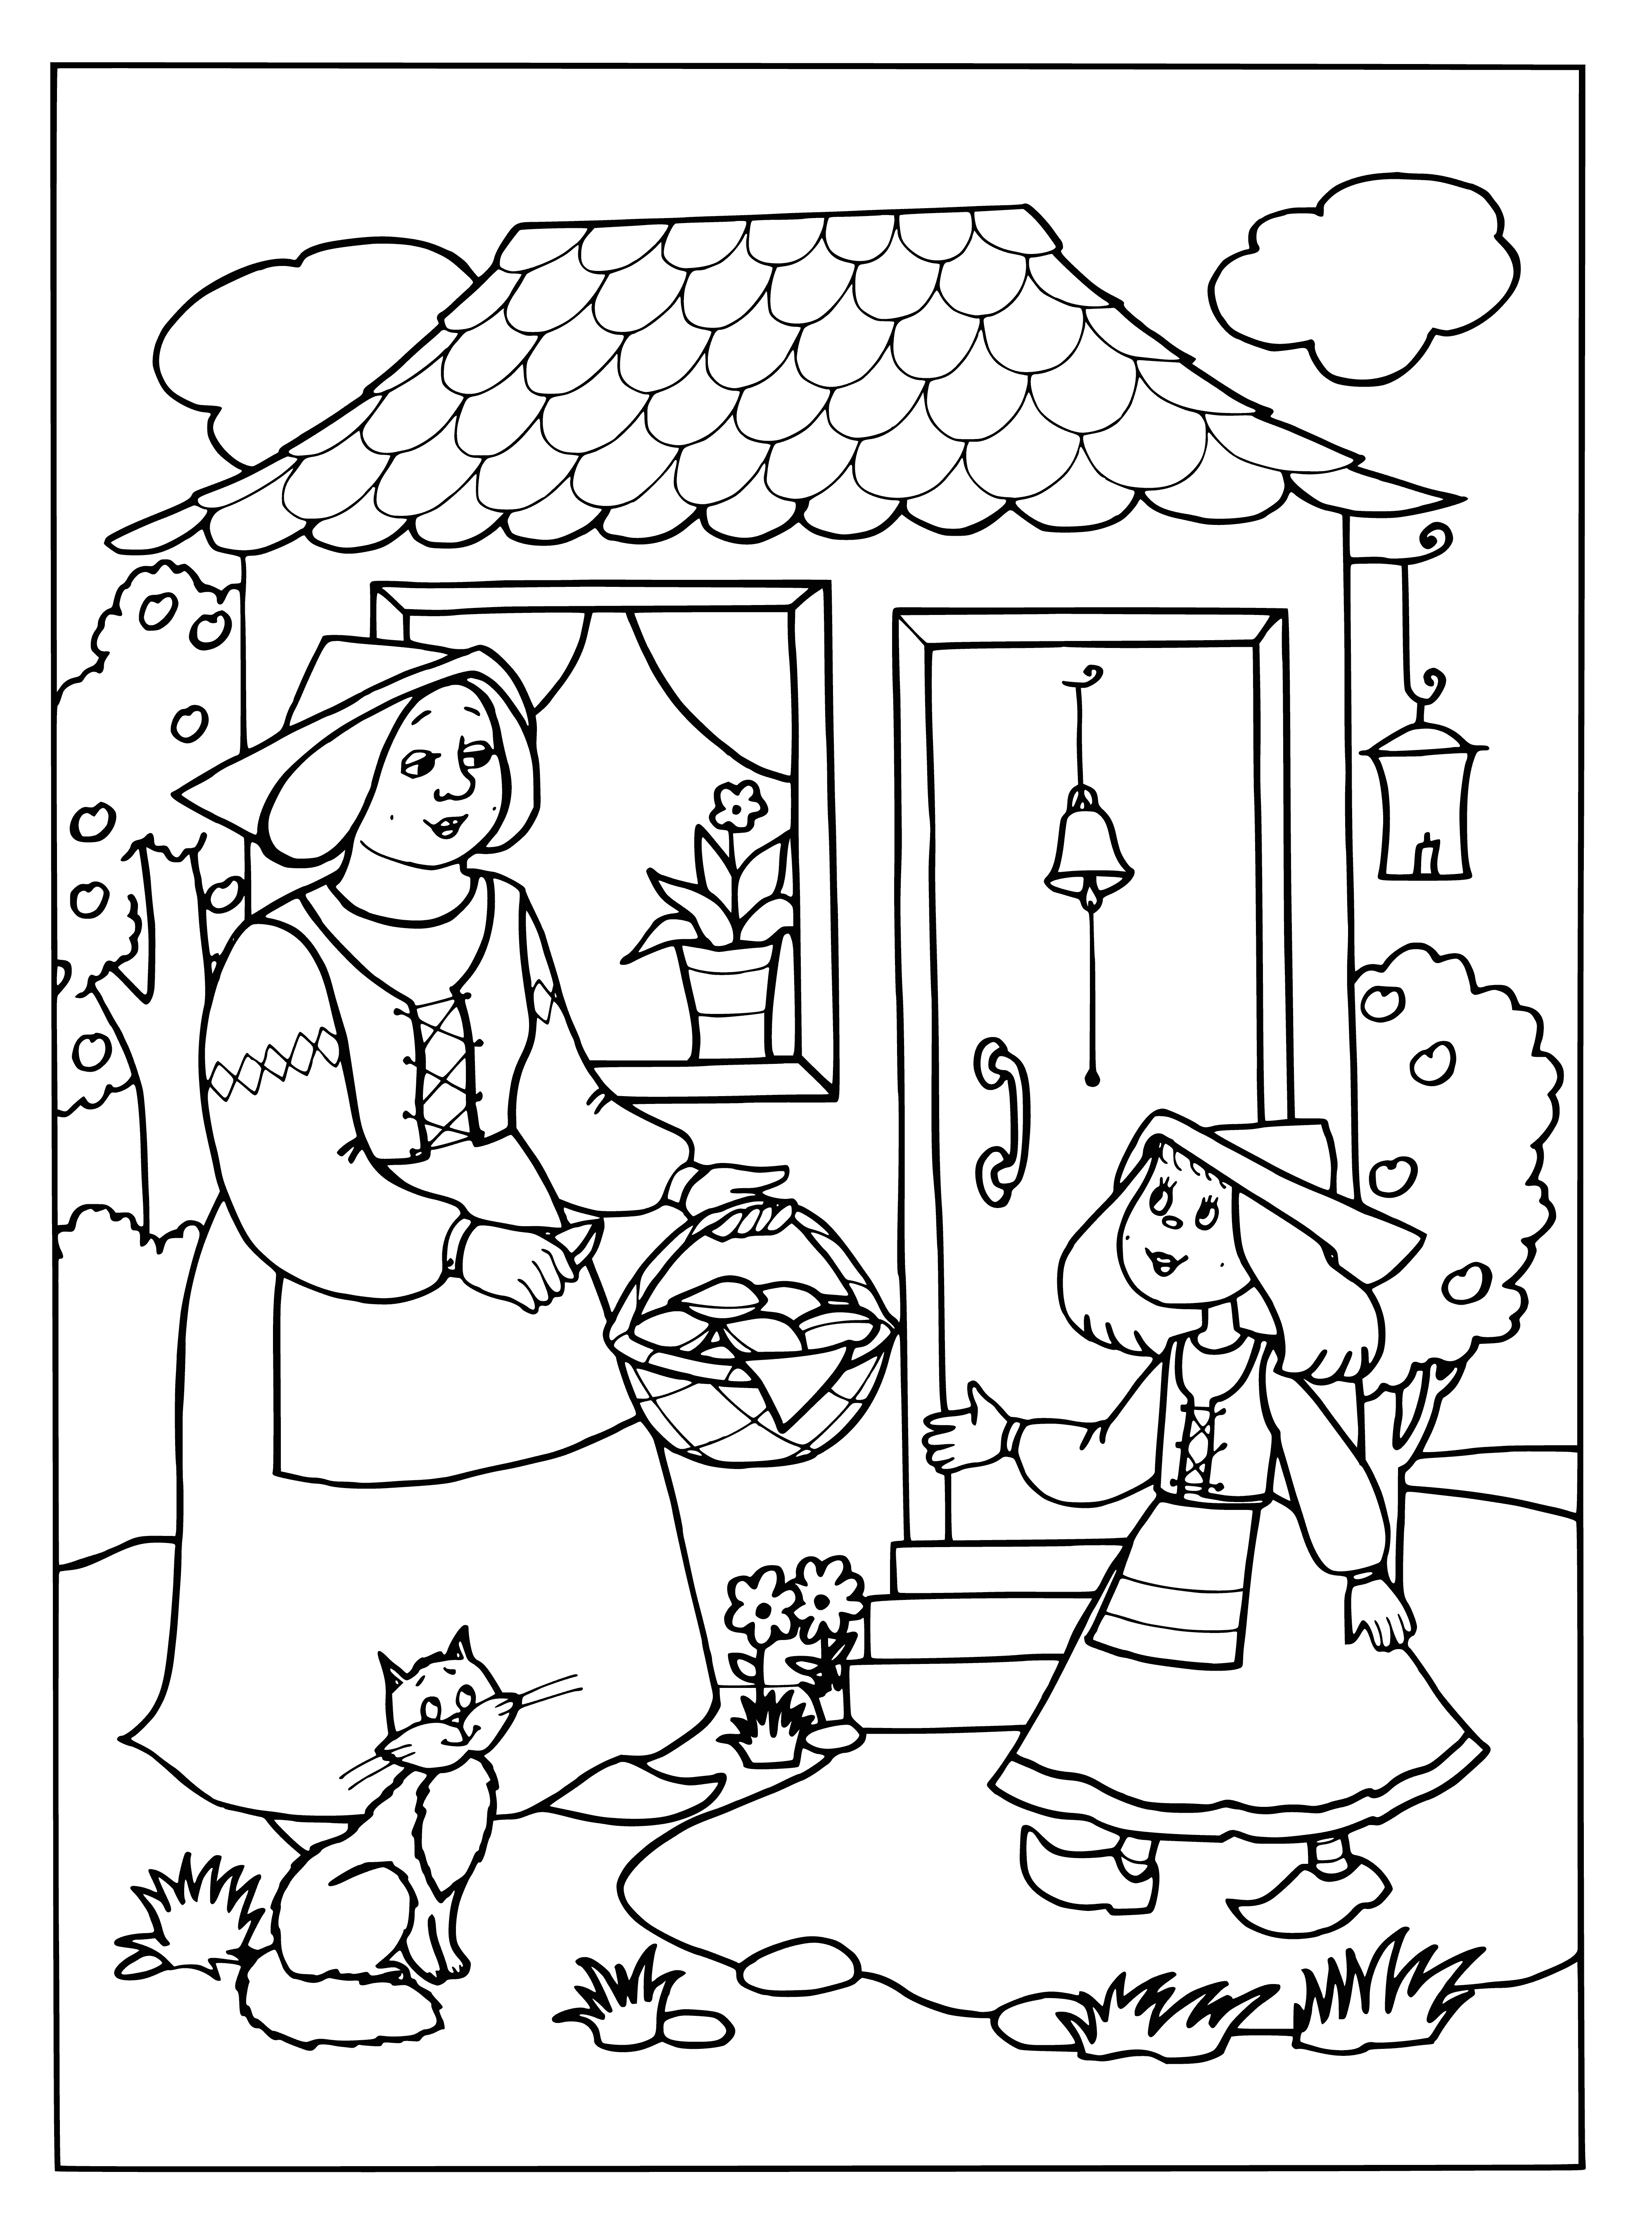 Pies for grandmother coloring page